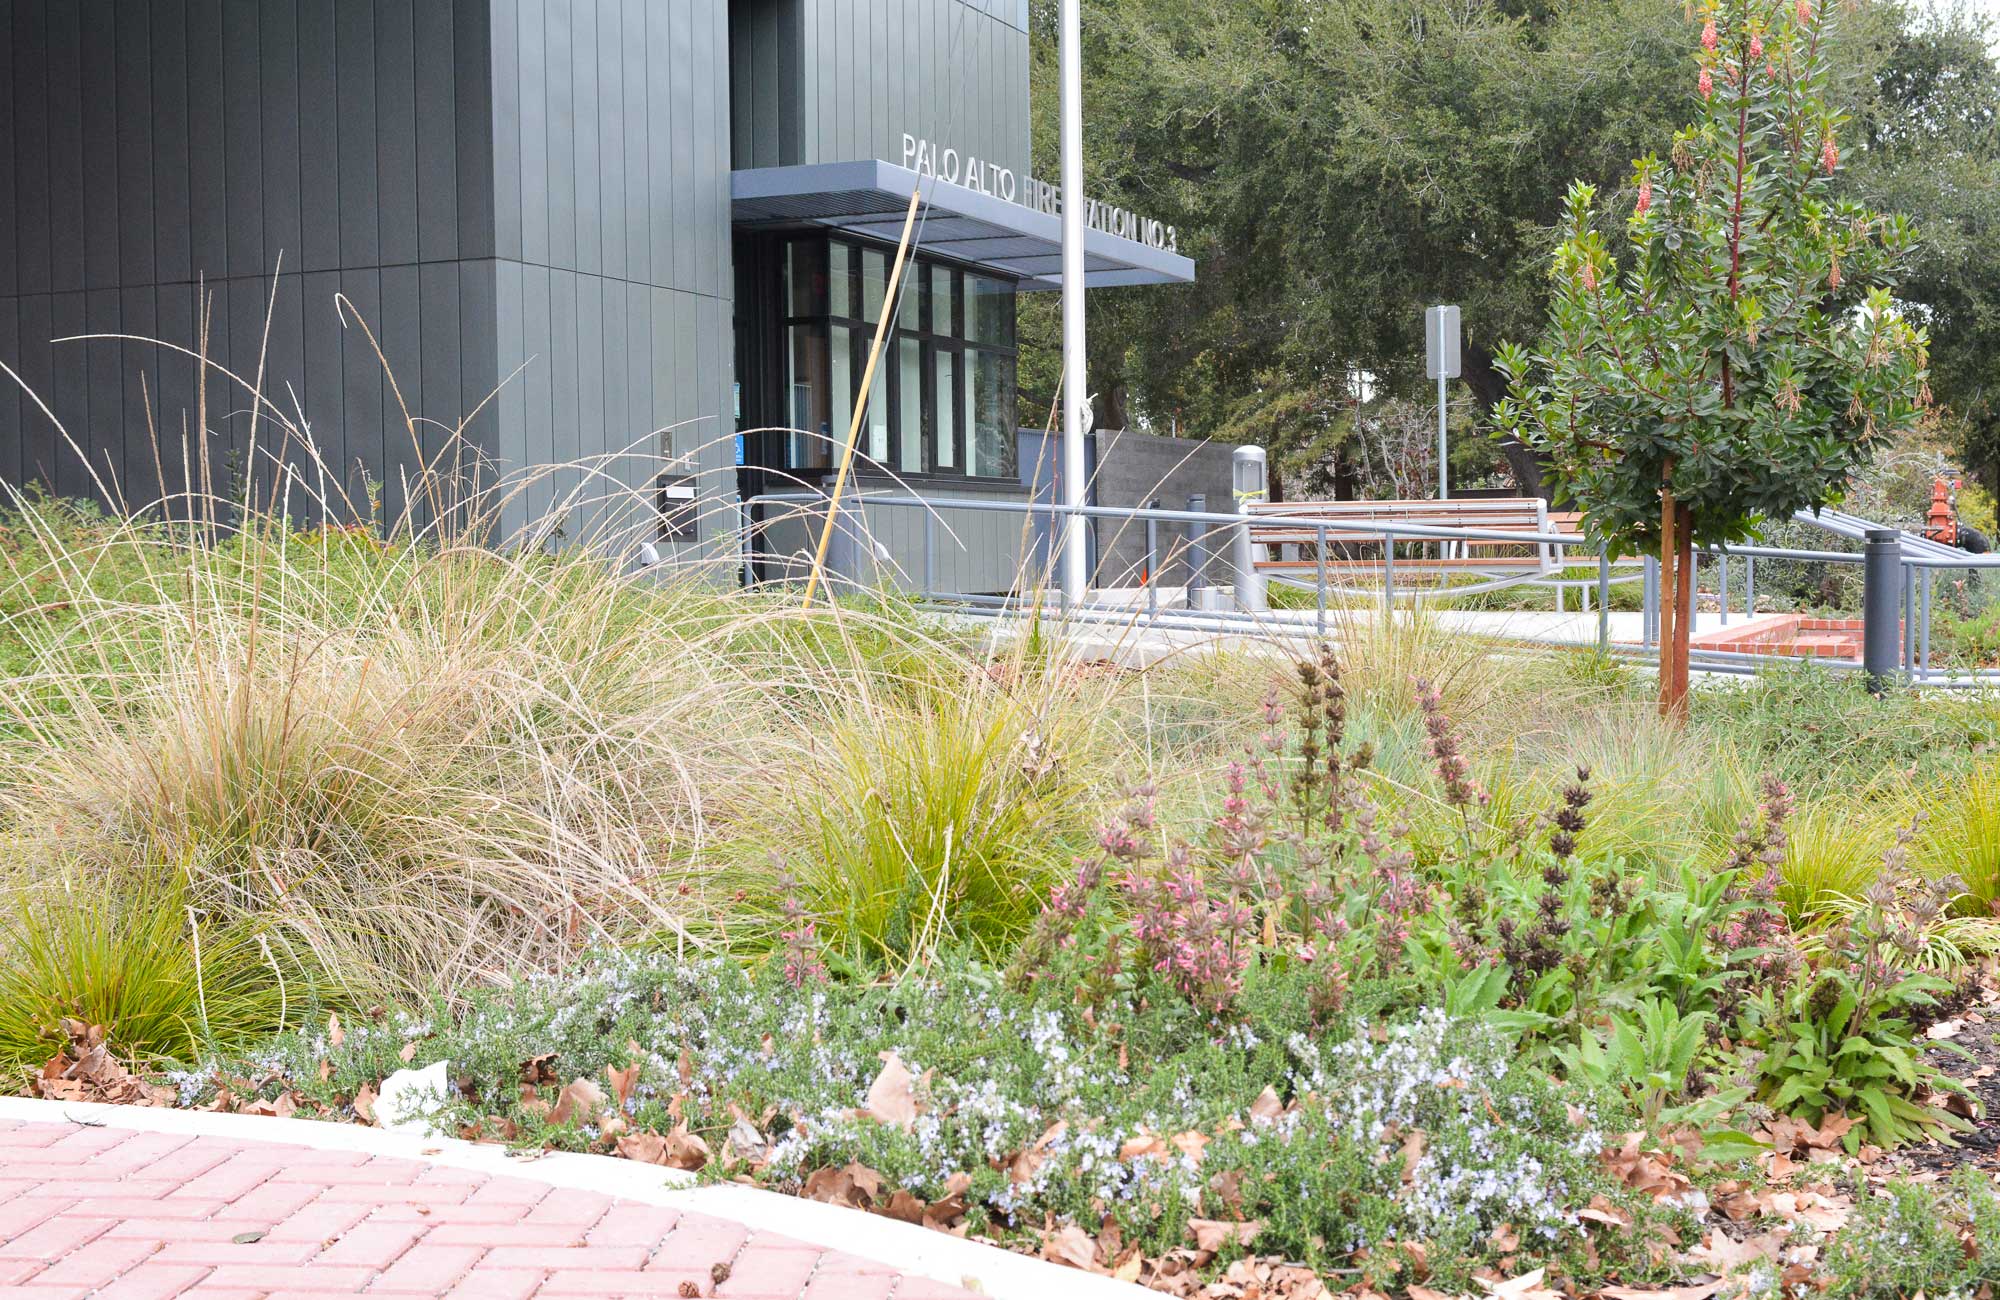 Biorention area example in the form of rain gardens, stormwater planters, and bioretention curb extensions.